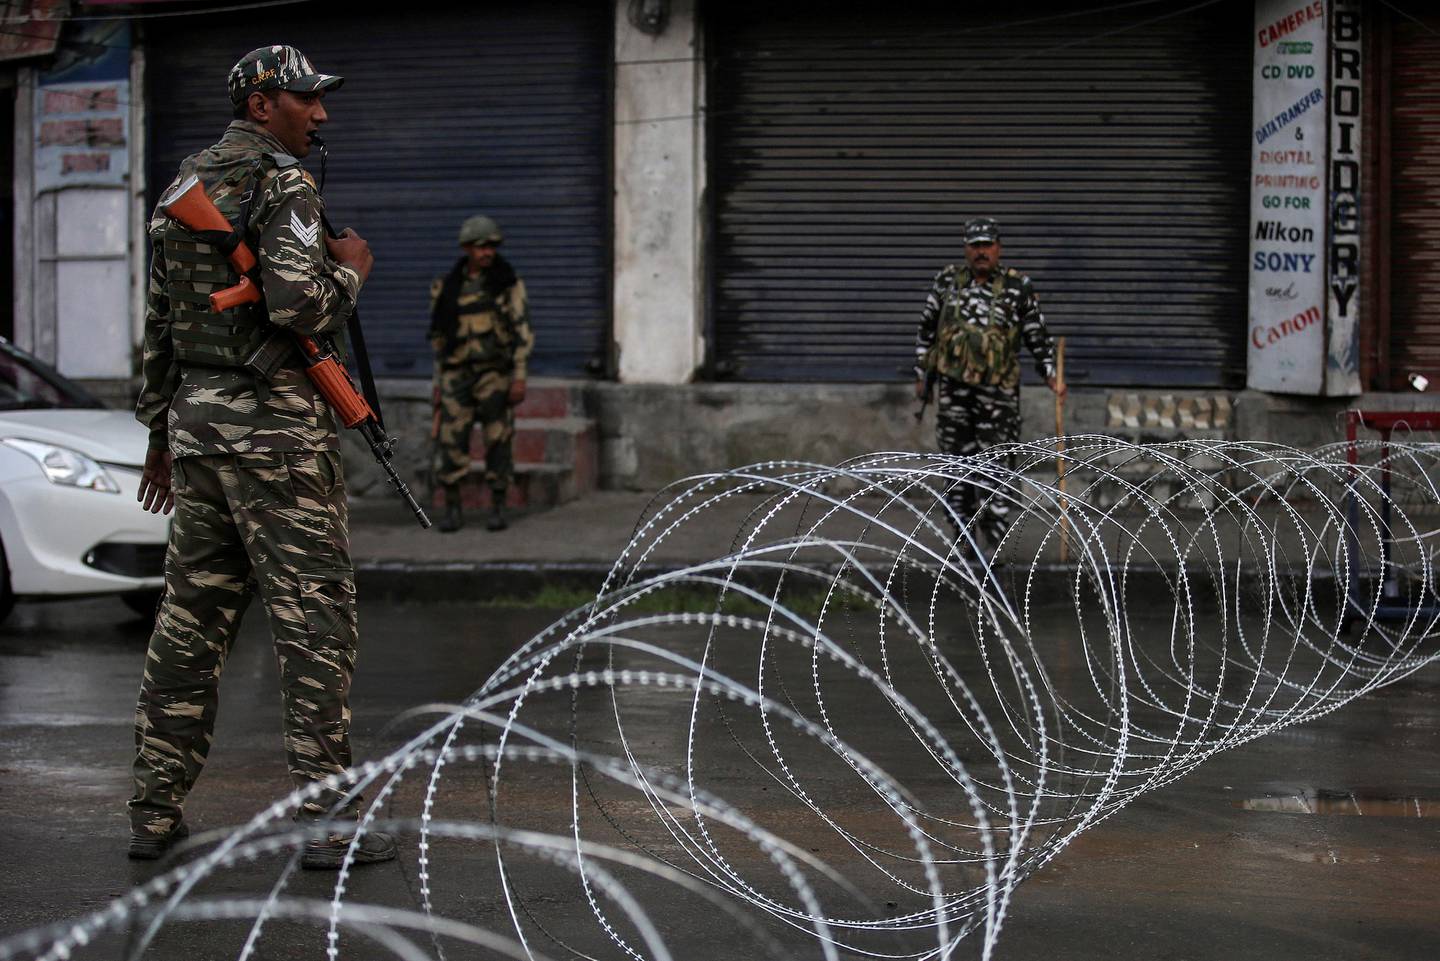 Indian security forces personnel stand guard next to concertina wire laid across a road during restrictions after the government scrapped special status for Kashmir, in Srinagar August 7, 2019. REUTERS/Danish Ismail